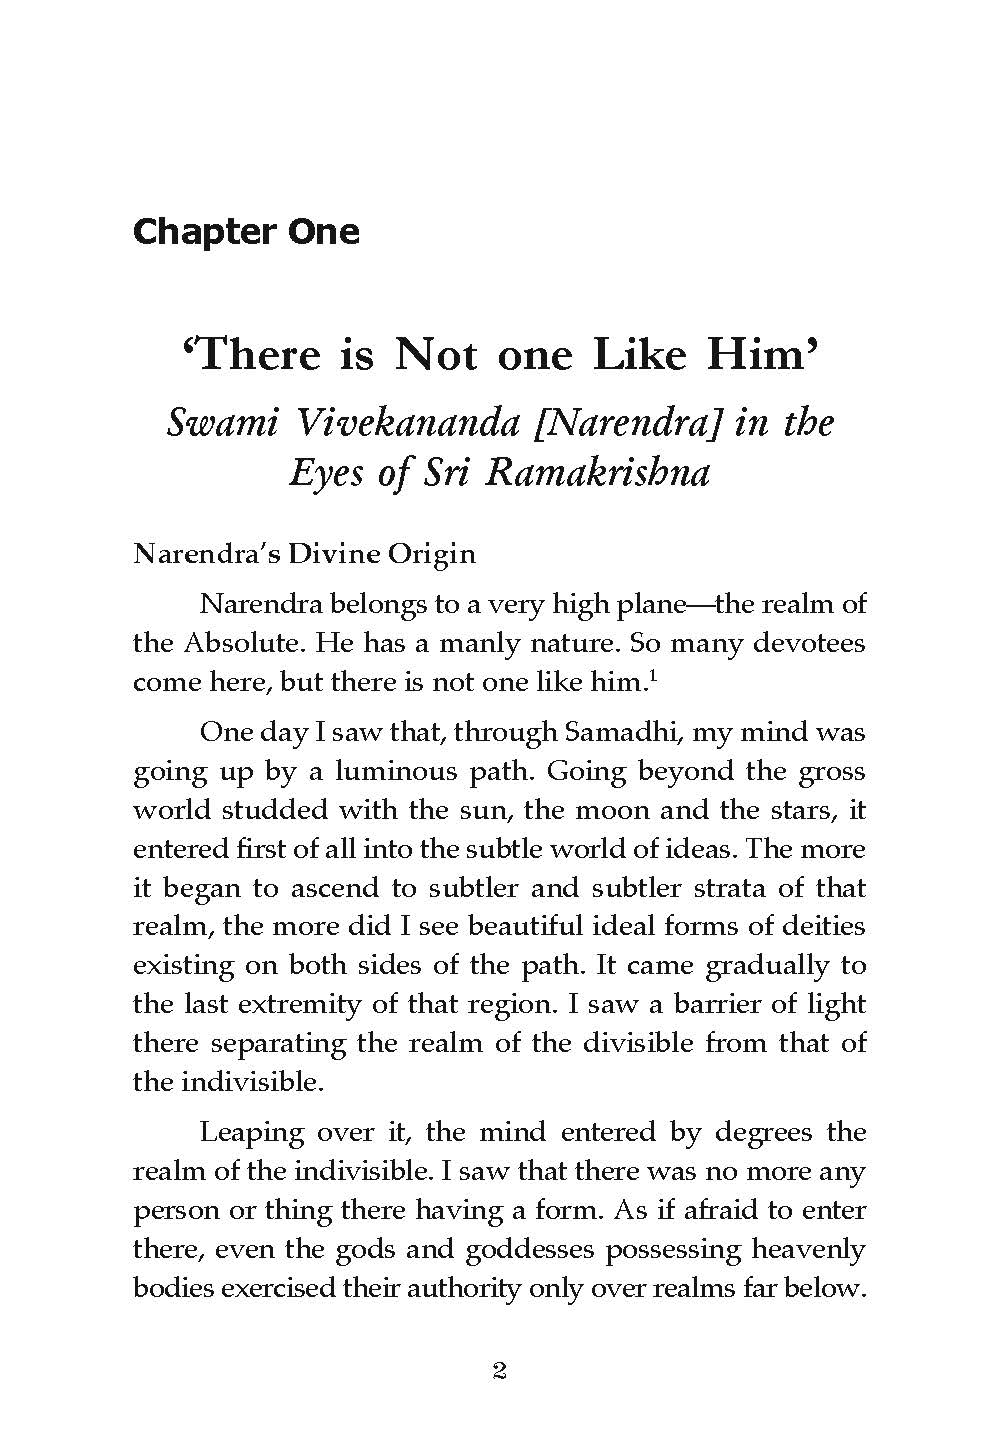 Swami Vivekananda - The Charm of His Personality and Message